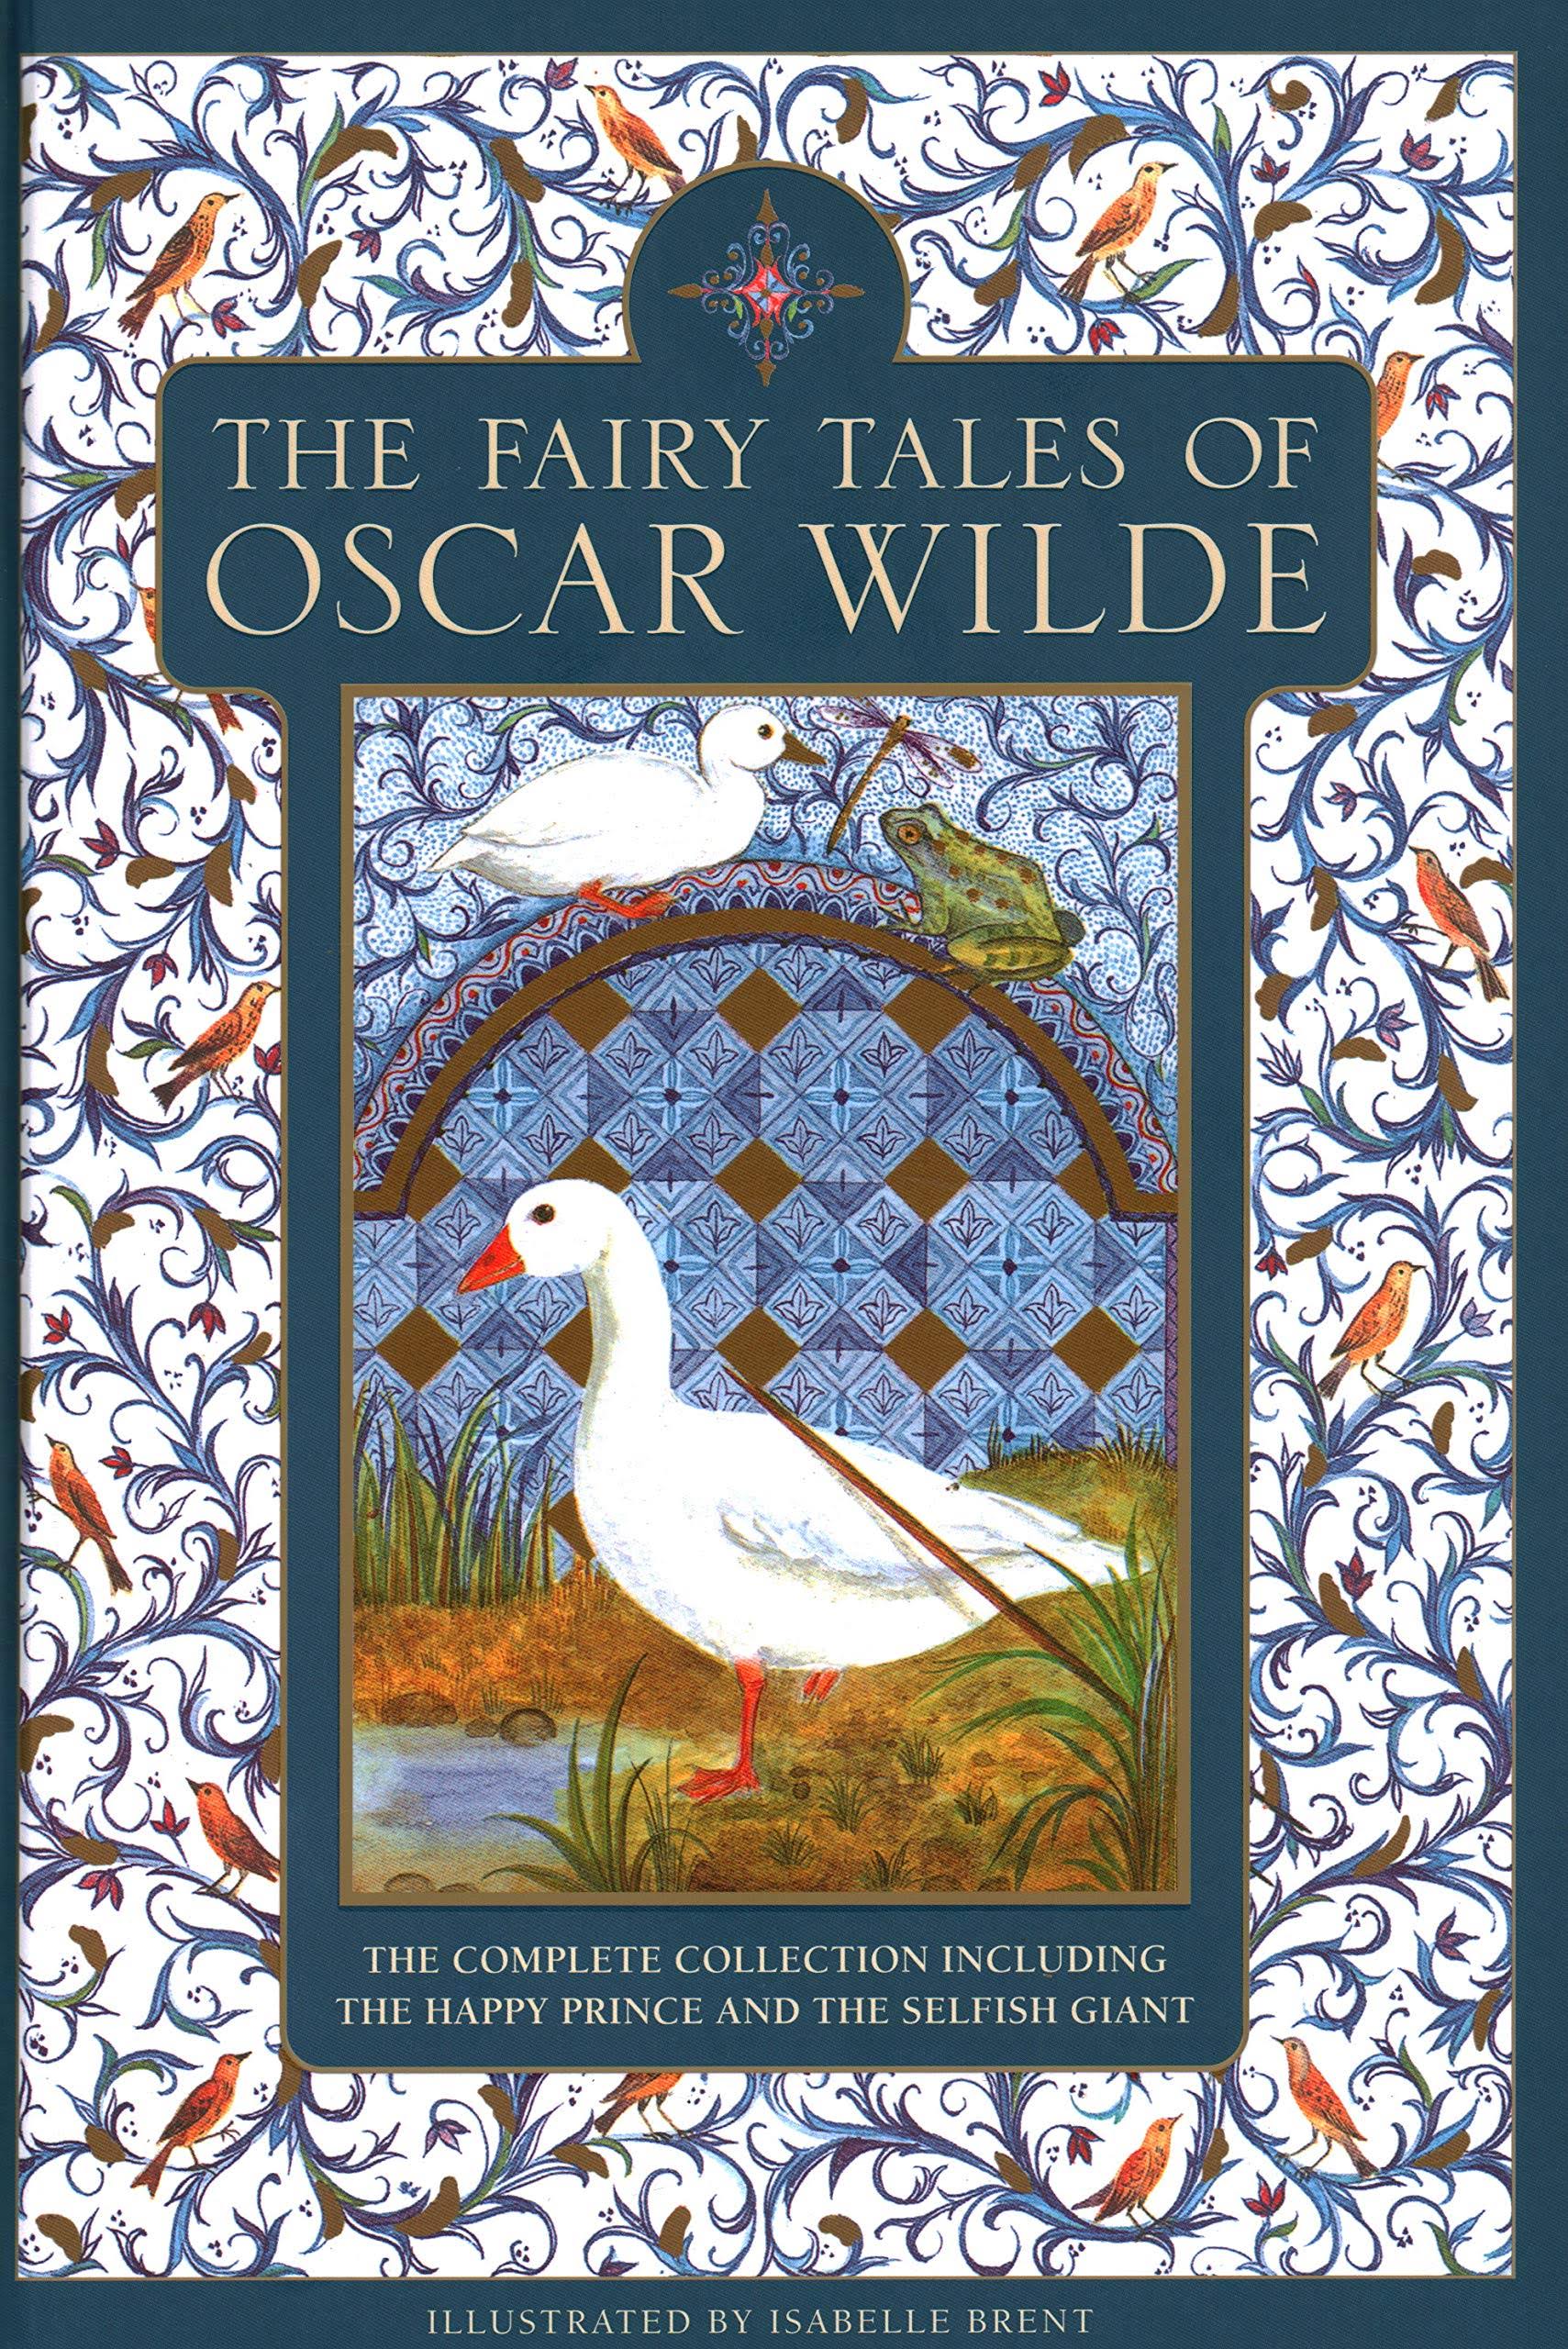 The Fairy Tales of Oscar Wilde: The Complete Collection Including the Happy Prince and the Selfish Giant [Book]